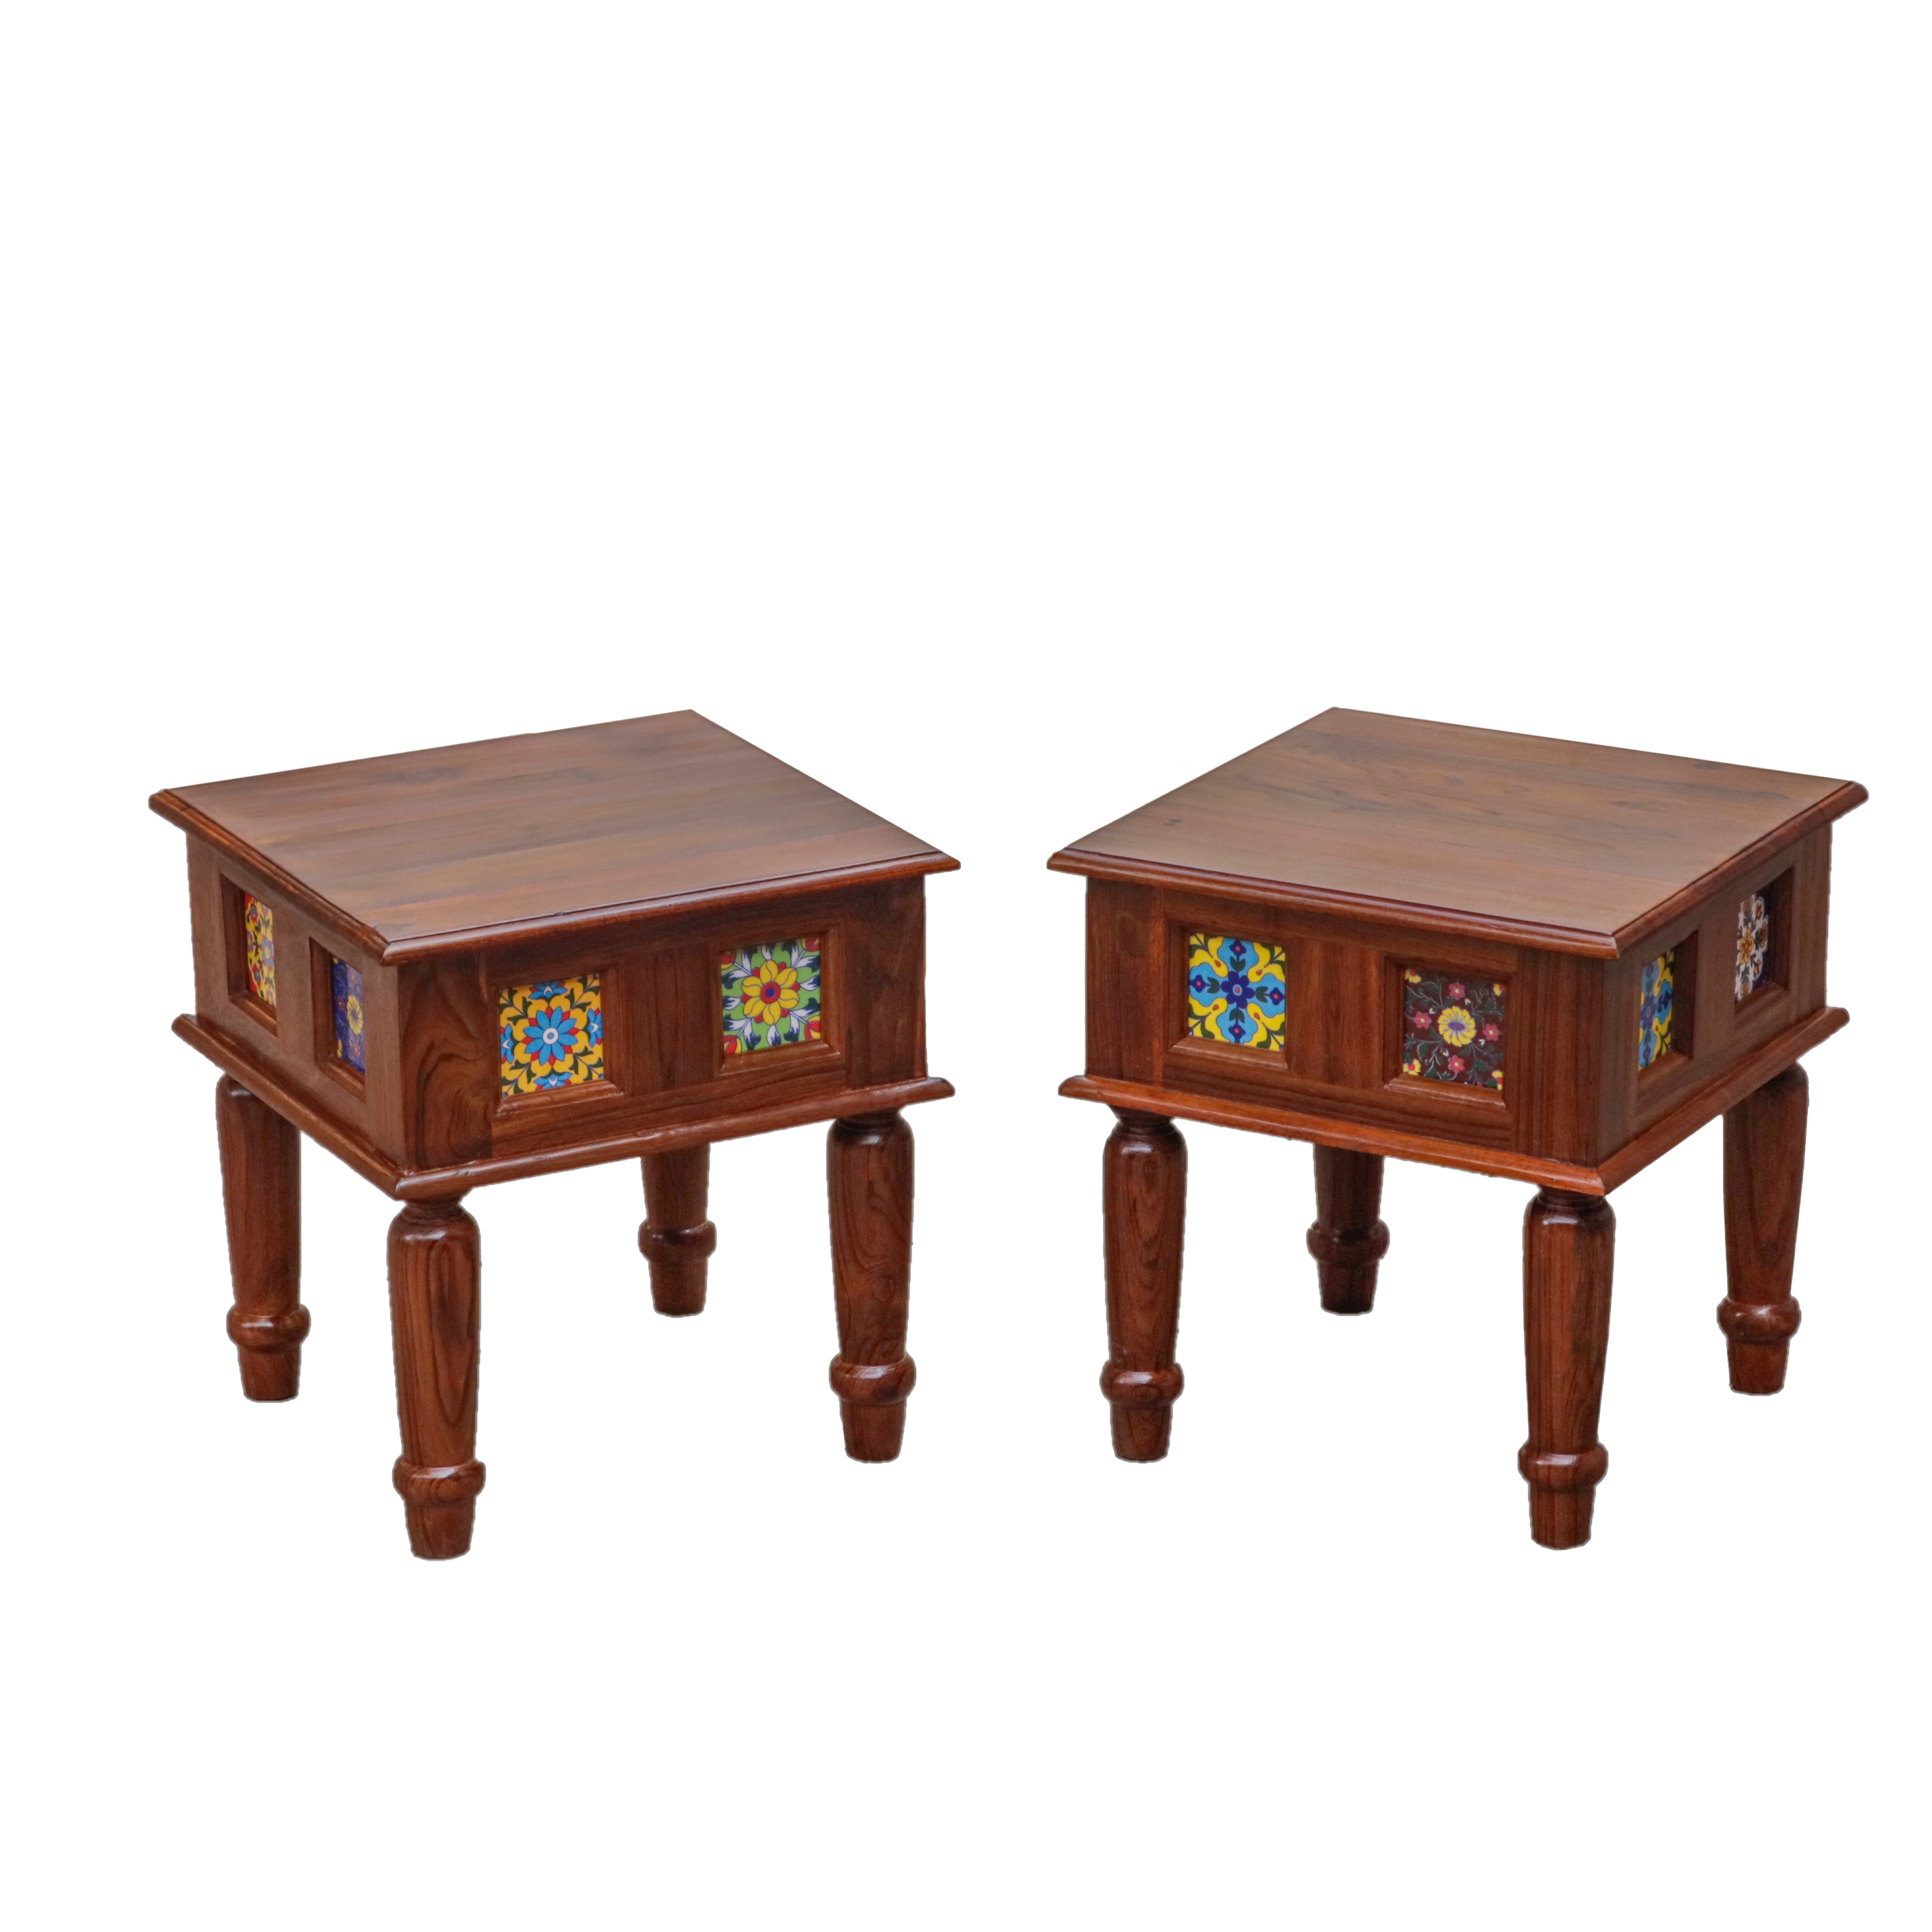 Aesthetic Round Leg Vintage Small Wooden Table with Tile (Set of 2) Bedside